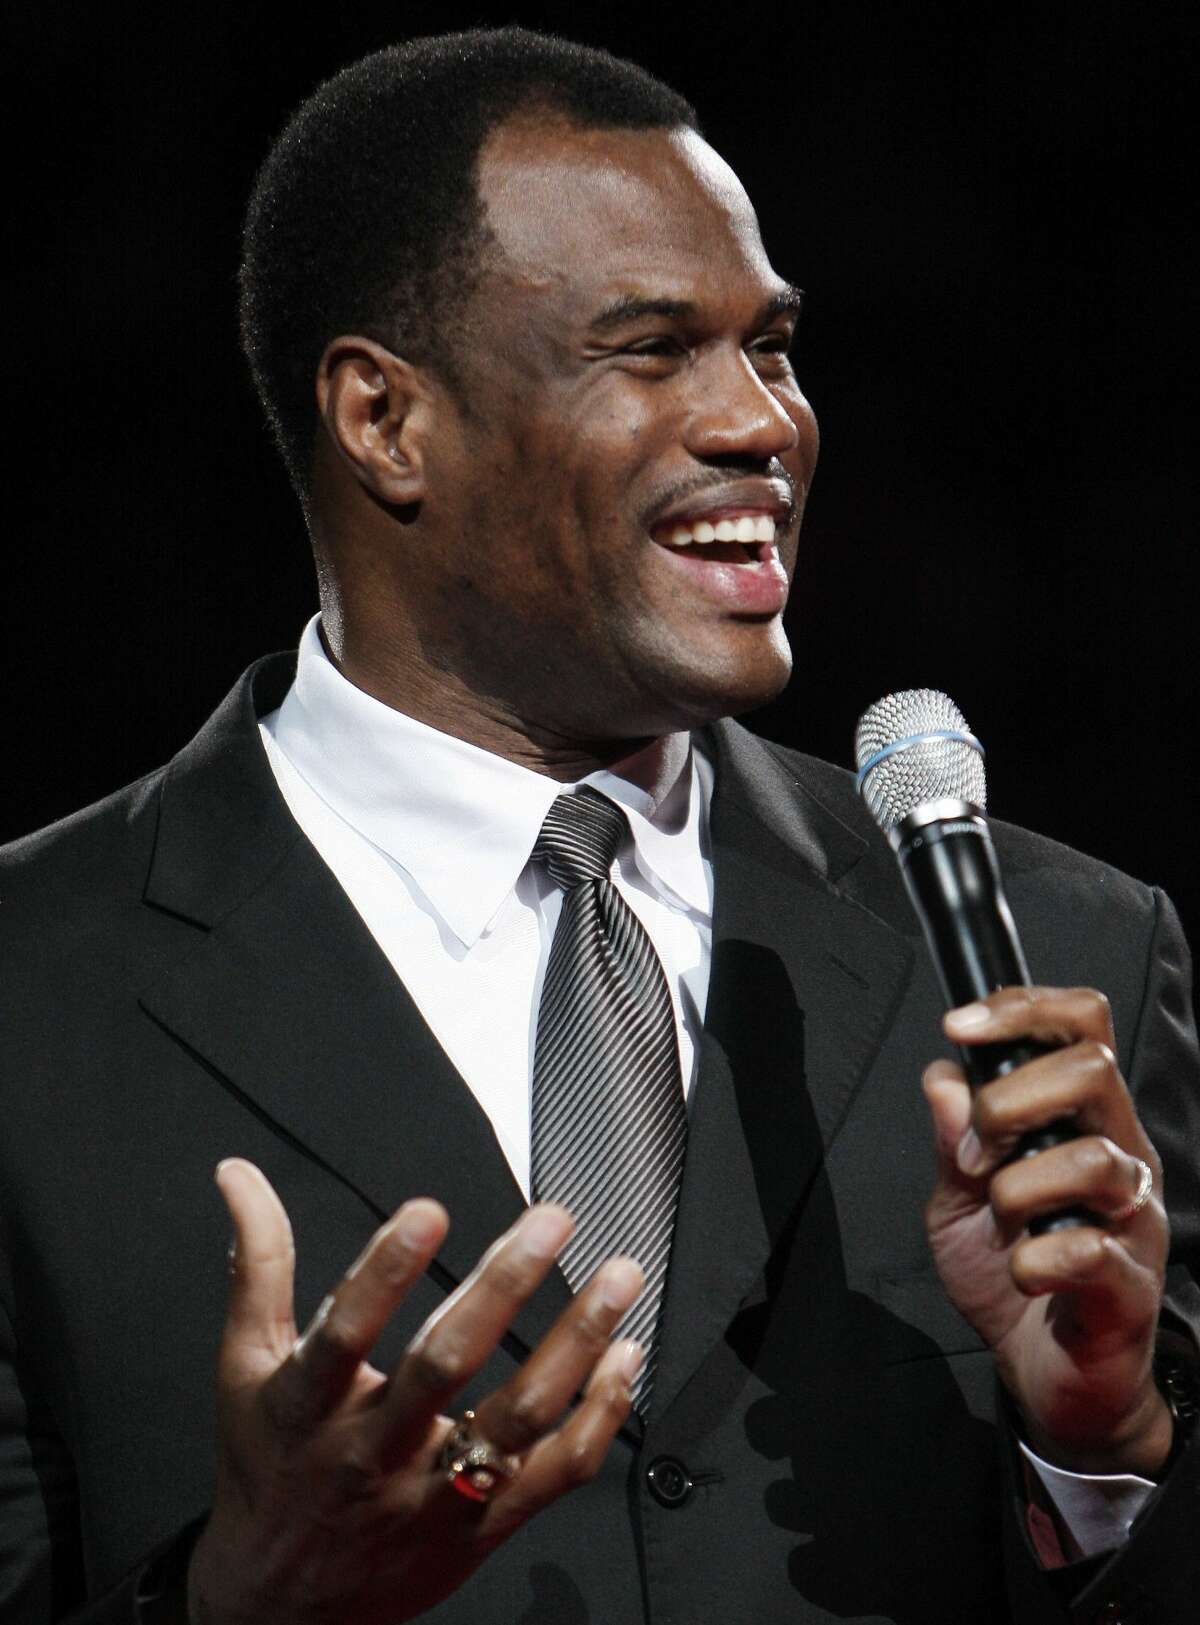 FILE - This Nov. 29, 2009 file photo shows former San Antonio Spurs player David Robinson addresing fans during a ceremony celebrating his induction into the Naismith Memorial Basketball Hall of Fame in San Antonio. Robinson will be among the speakers at a motivational business event in San Antonio.